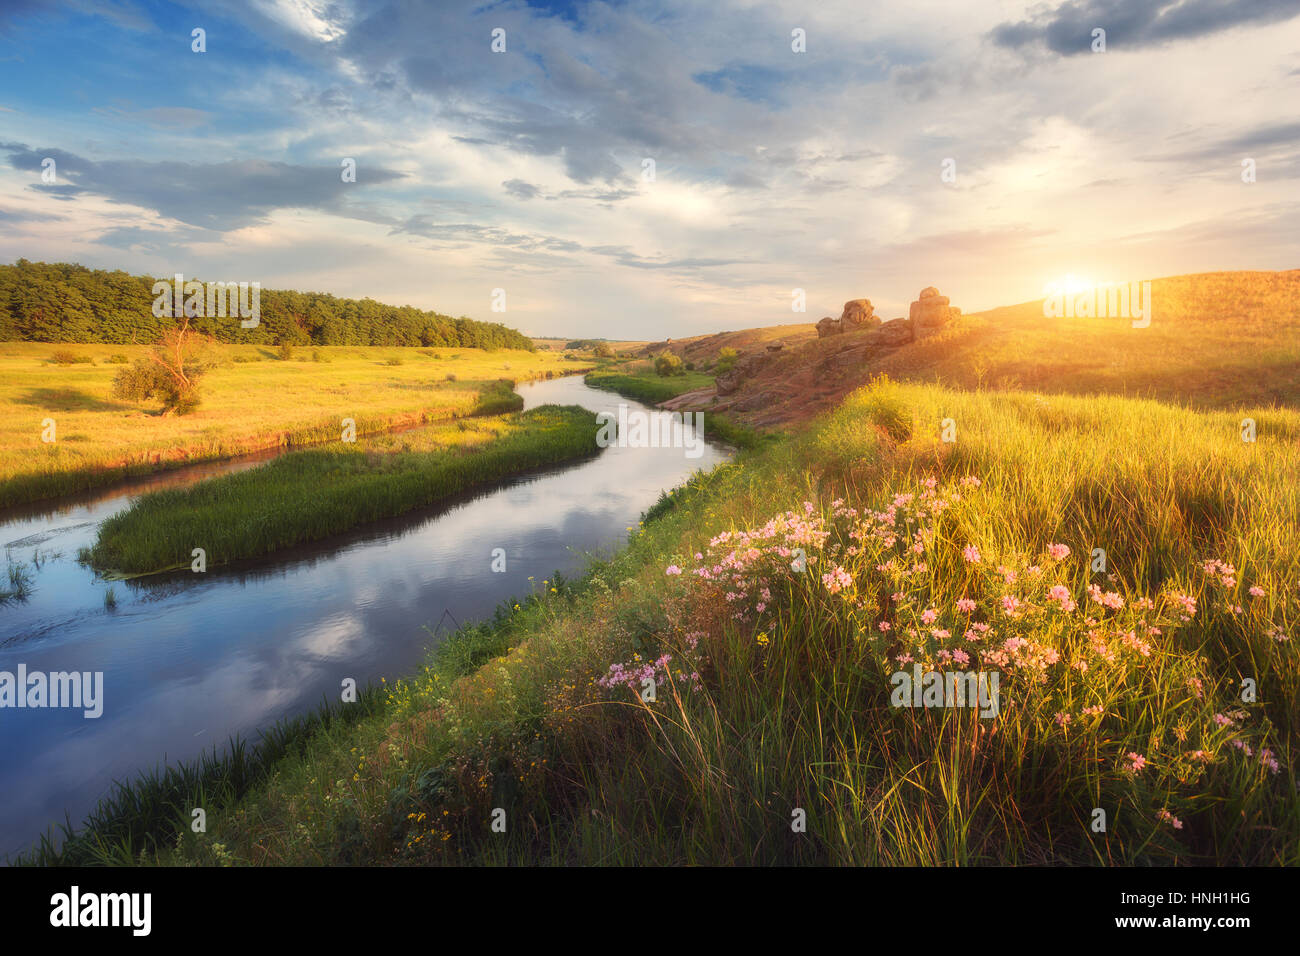 Summer landscape at sunset. Flowers, green grass at the river against rocks and blue sky with clouds. Travel and nature background. River in the beaut Stock Photo